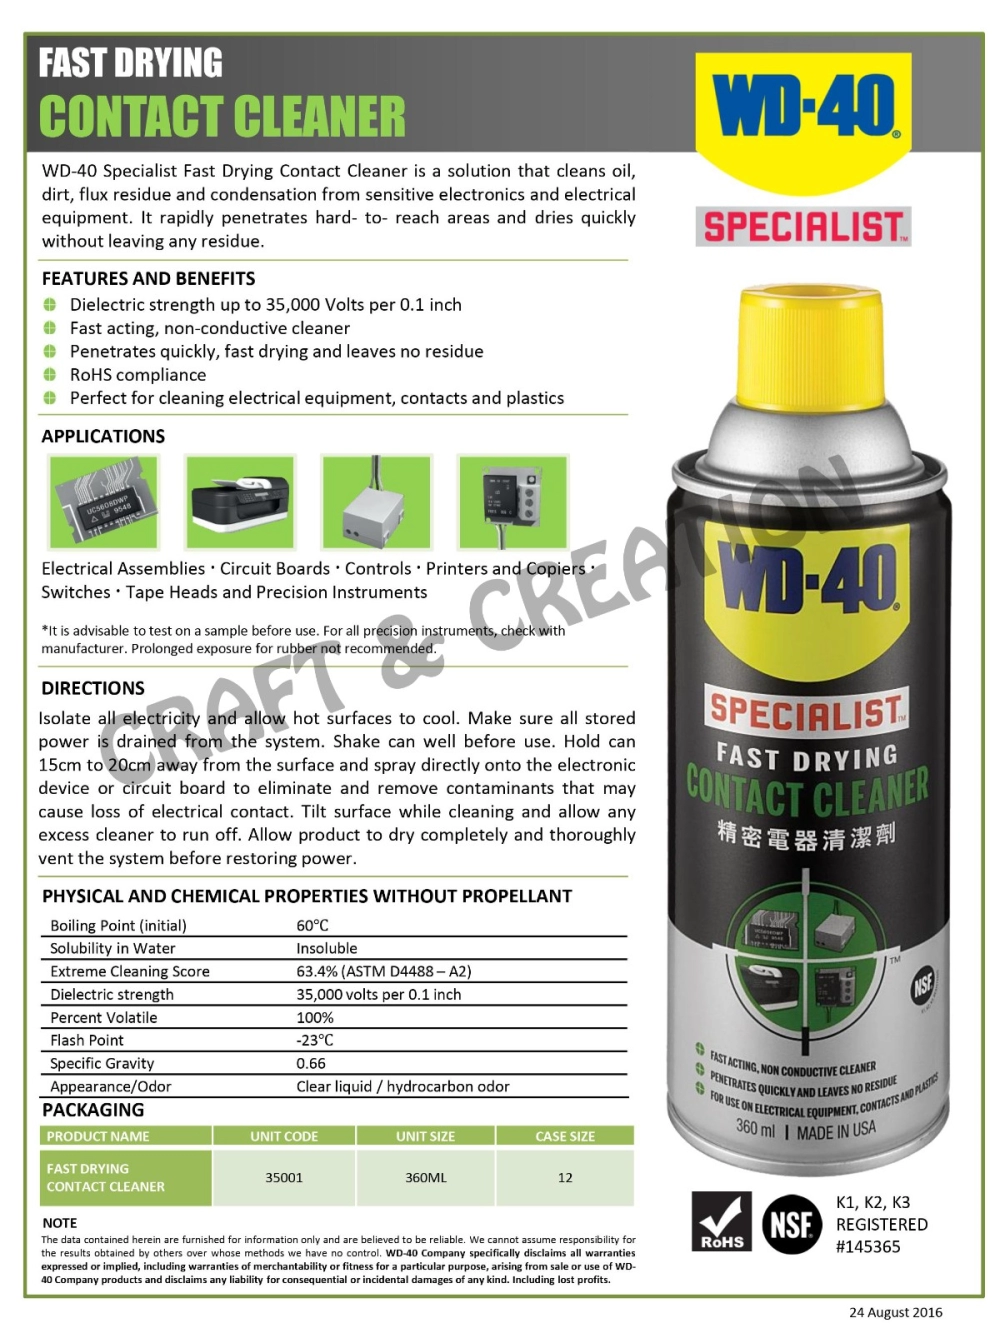 360ml WD-40 SPECIALIST FAST DRYING CONTACT CLEANER